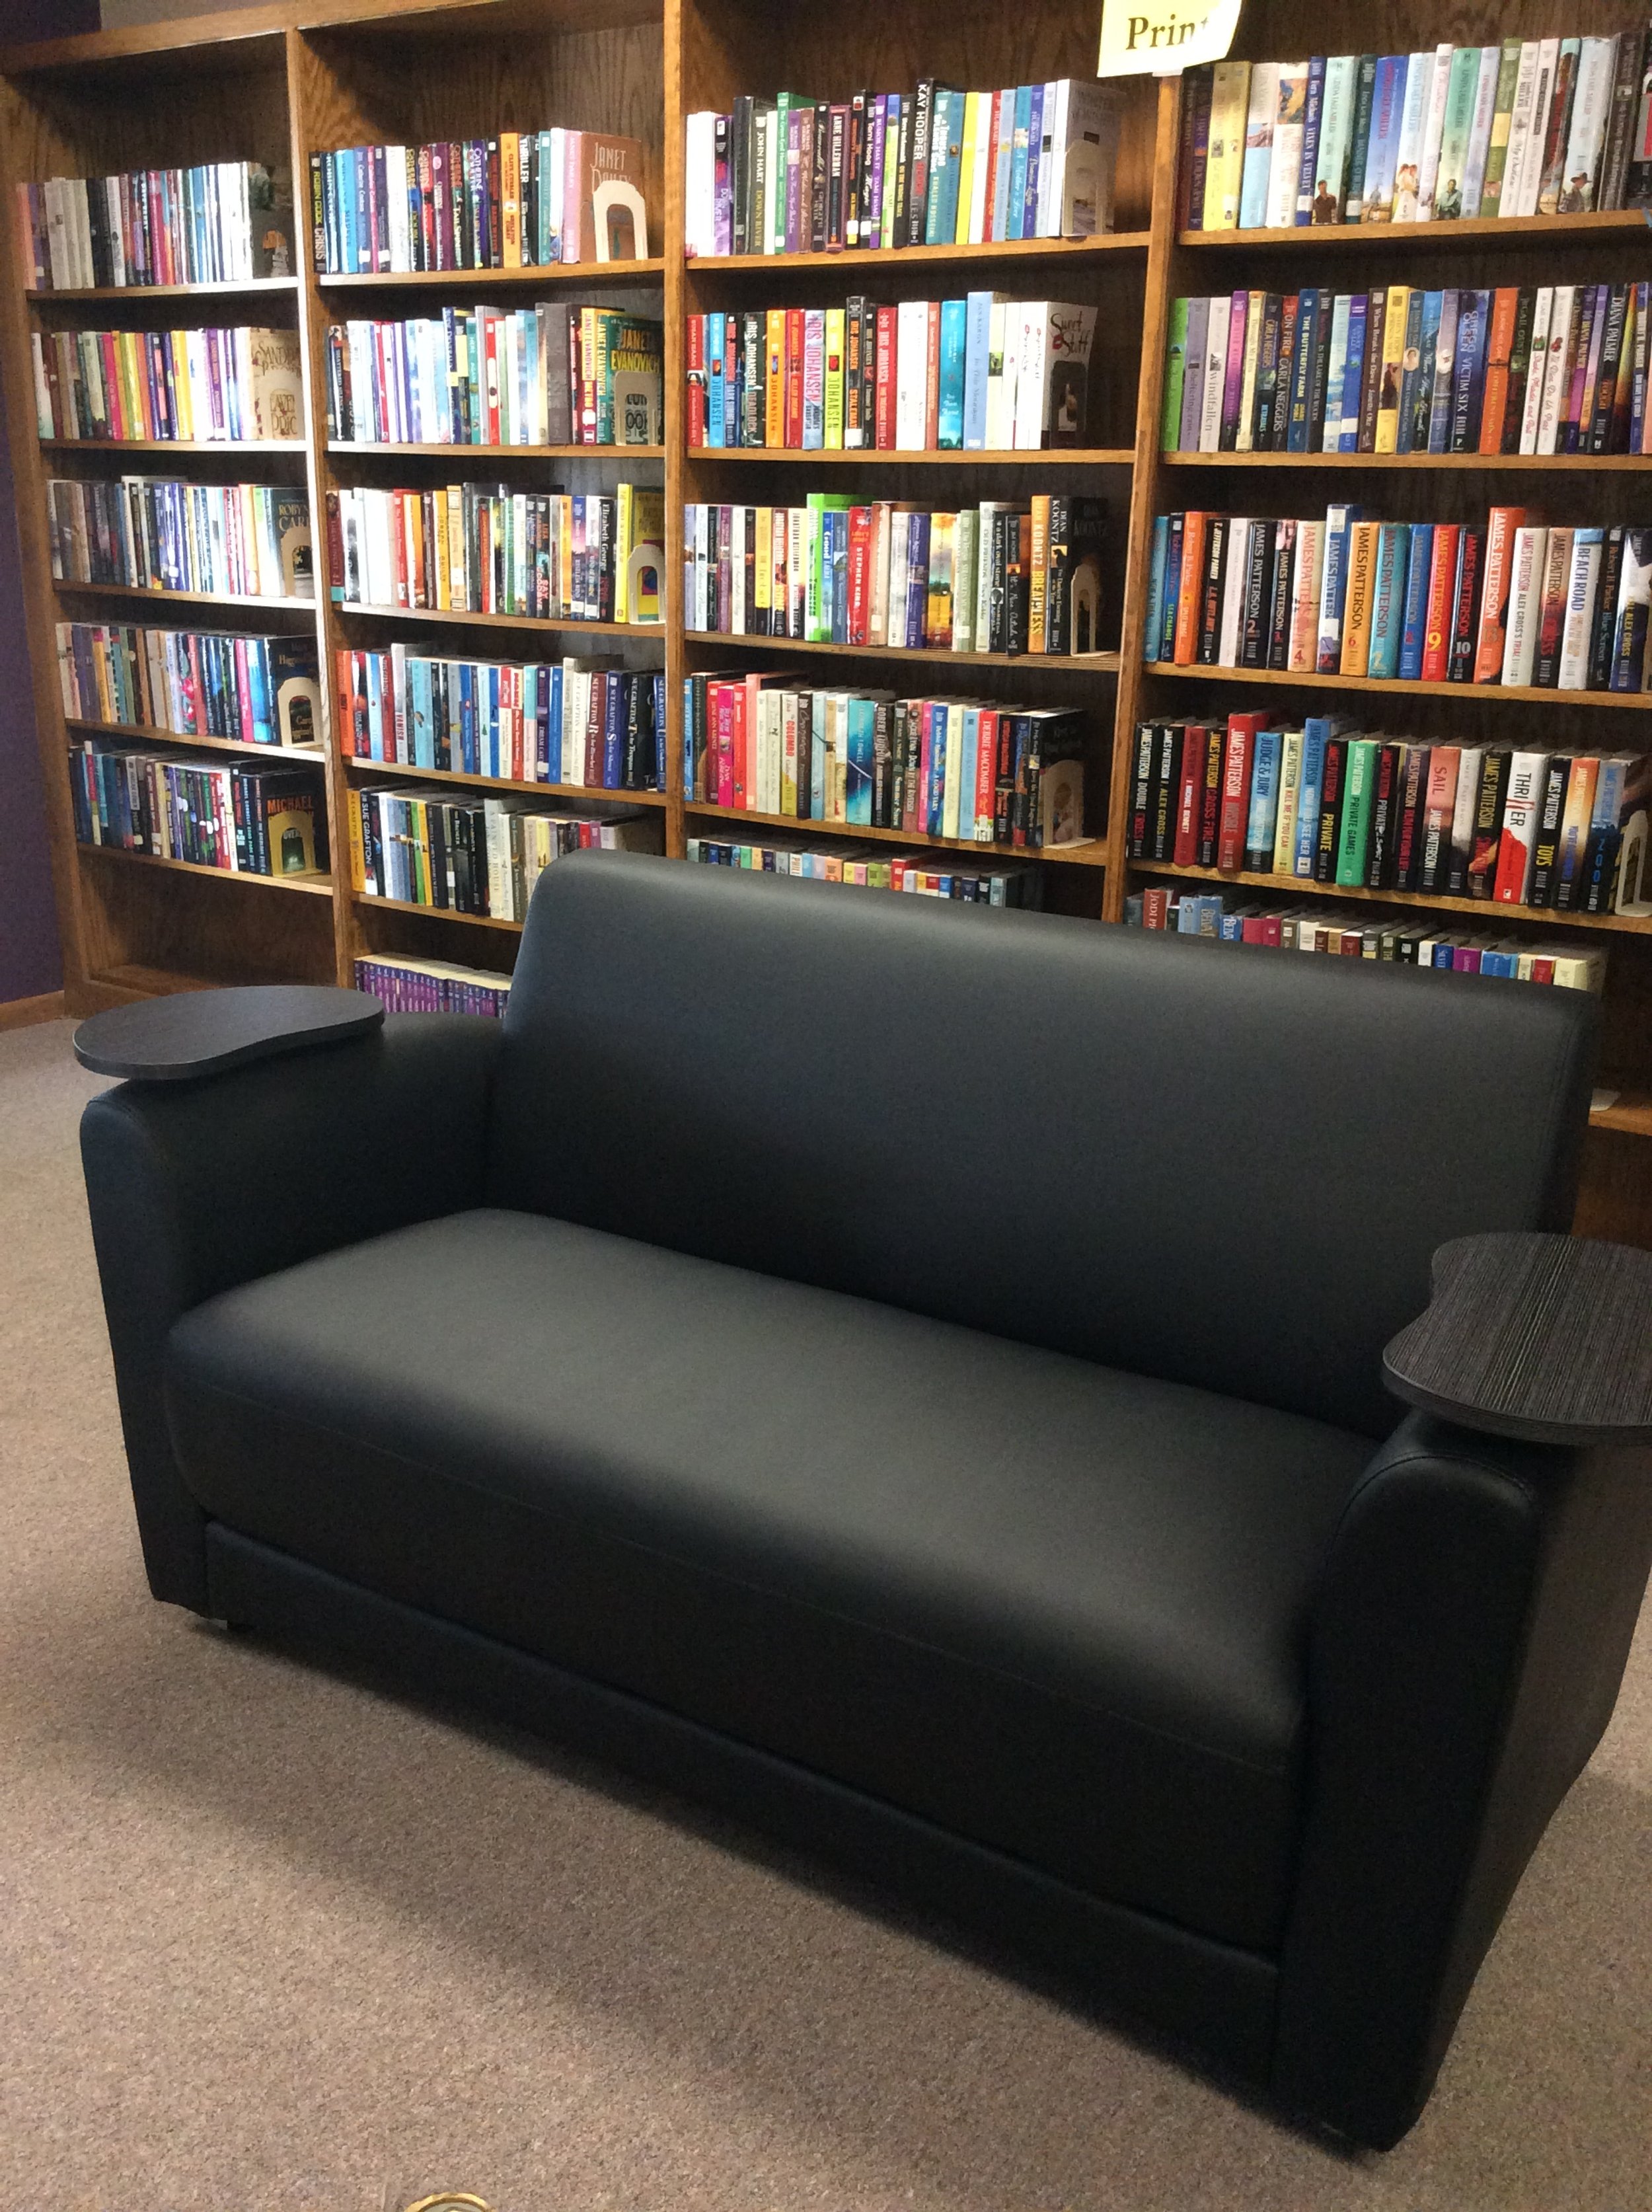 Grand Junction Library couch.jpg